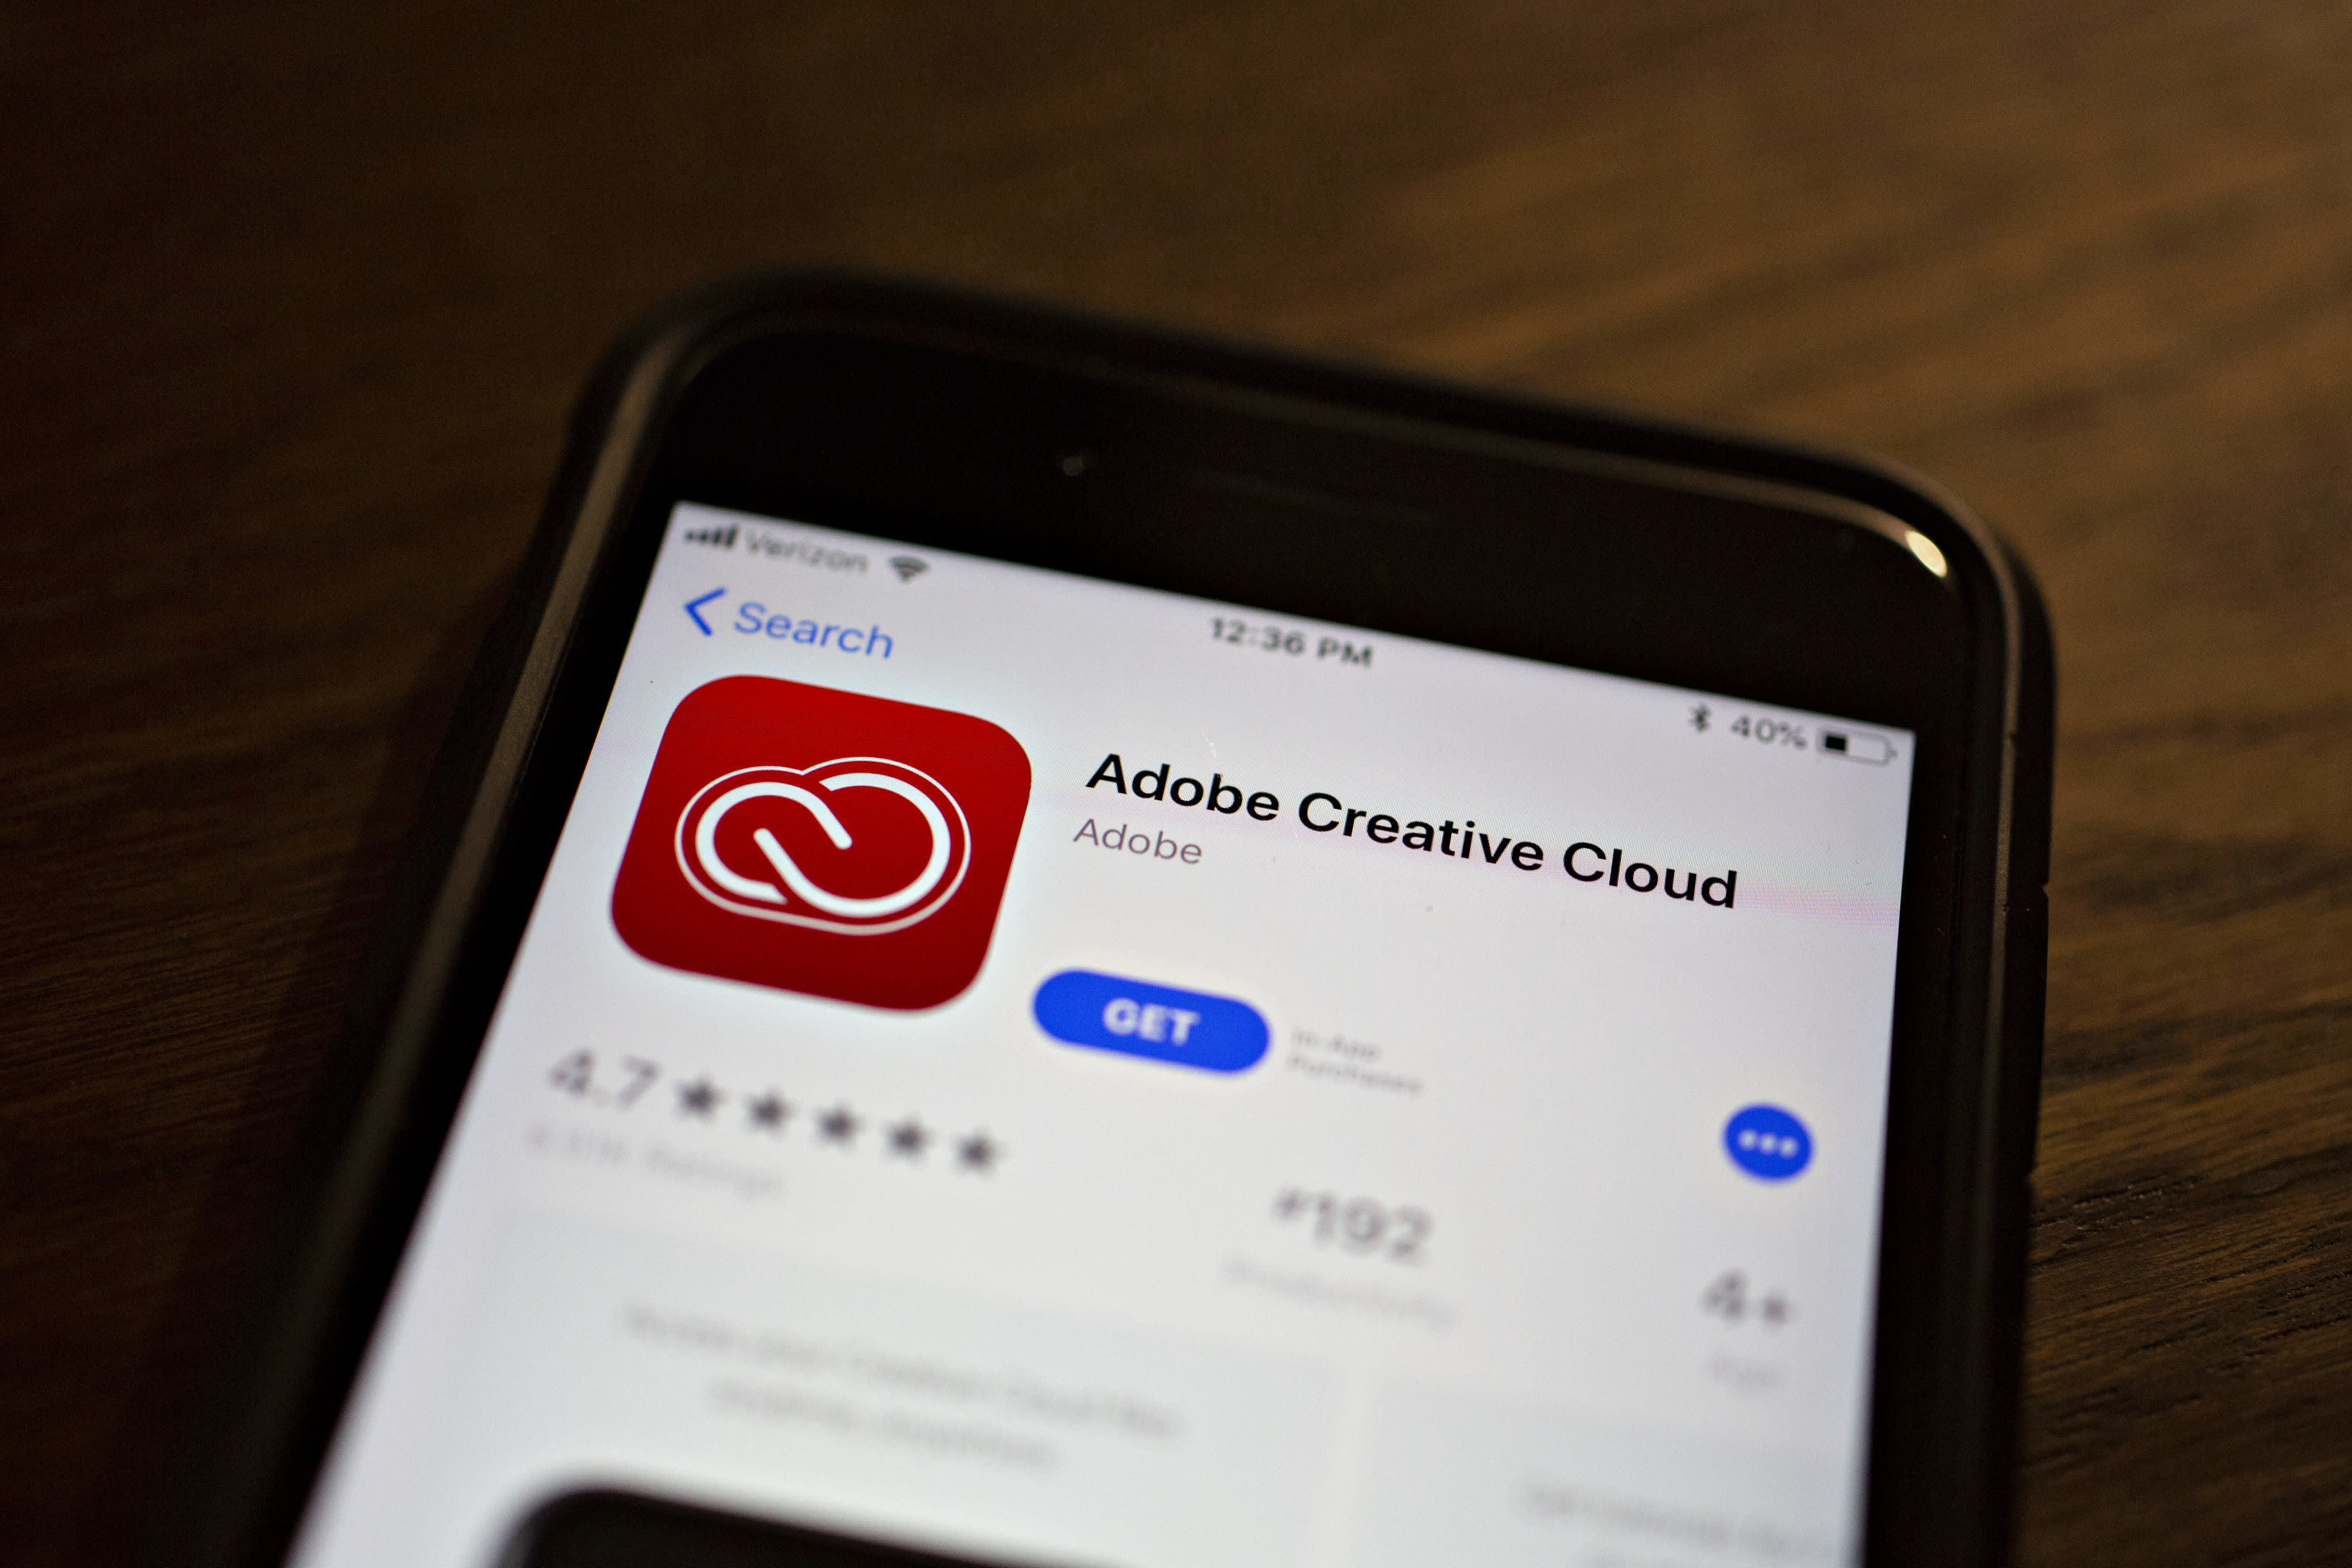 BMO downgrades Adobe, says there are long-term concerns on durability of Creative Cloud